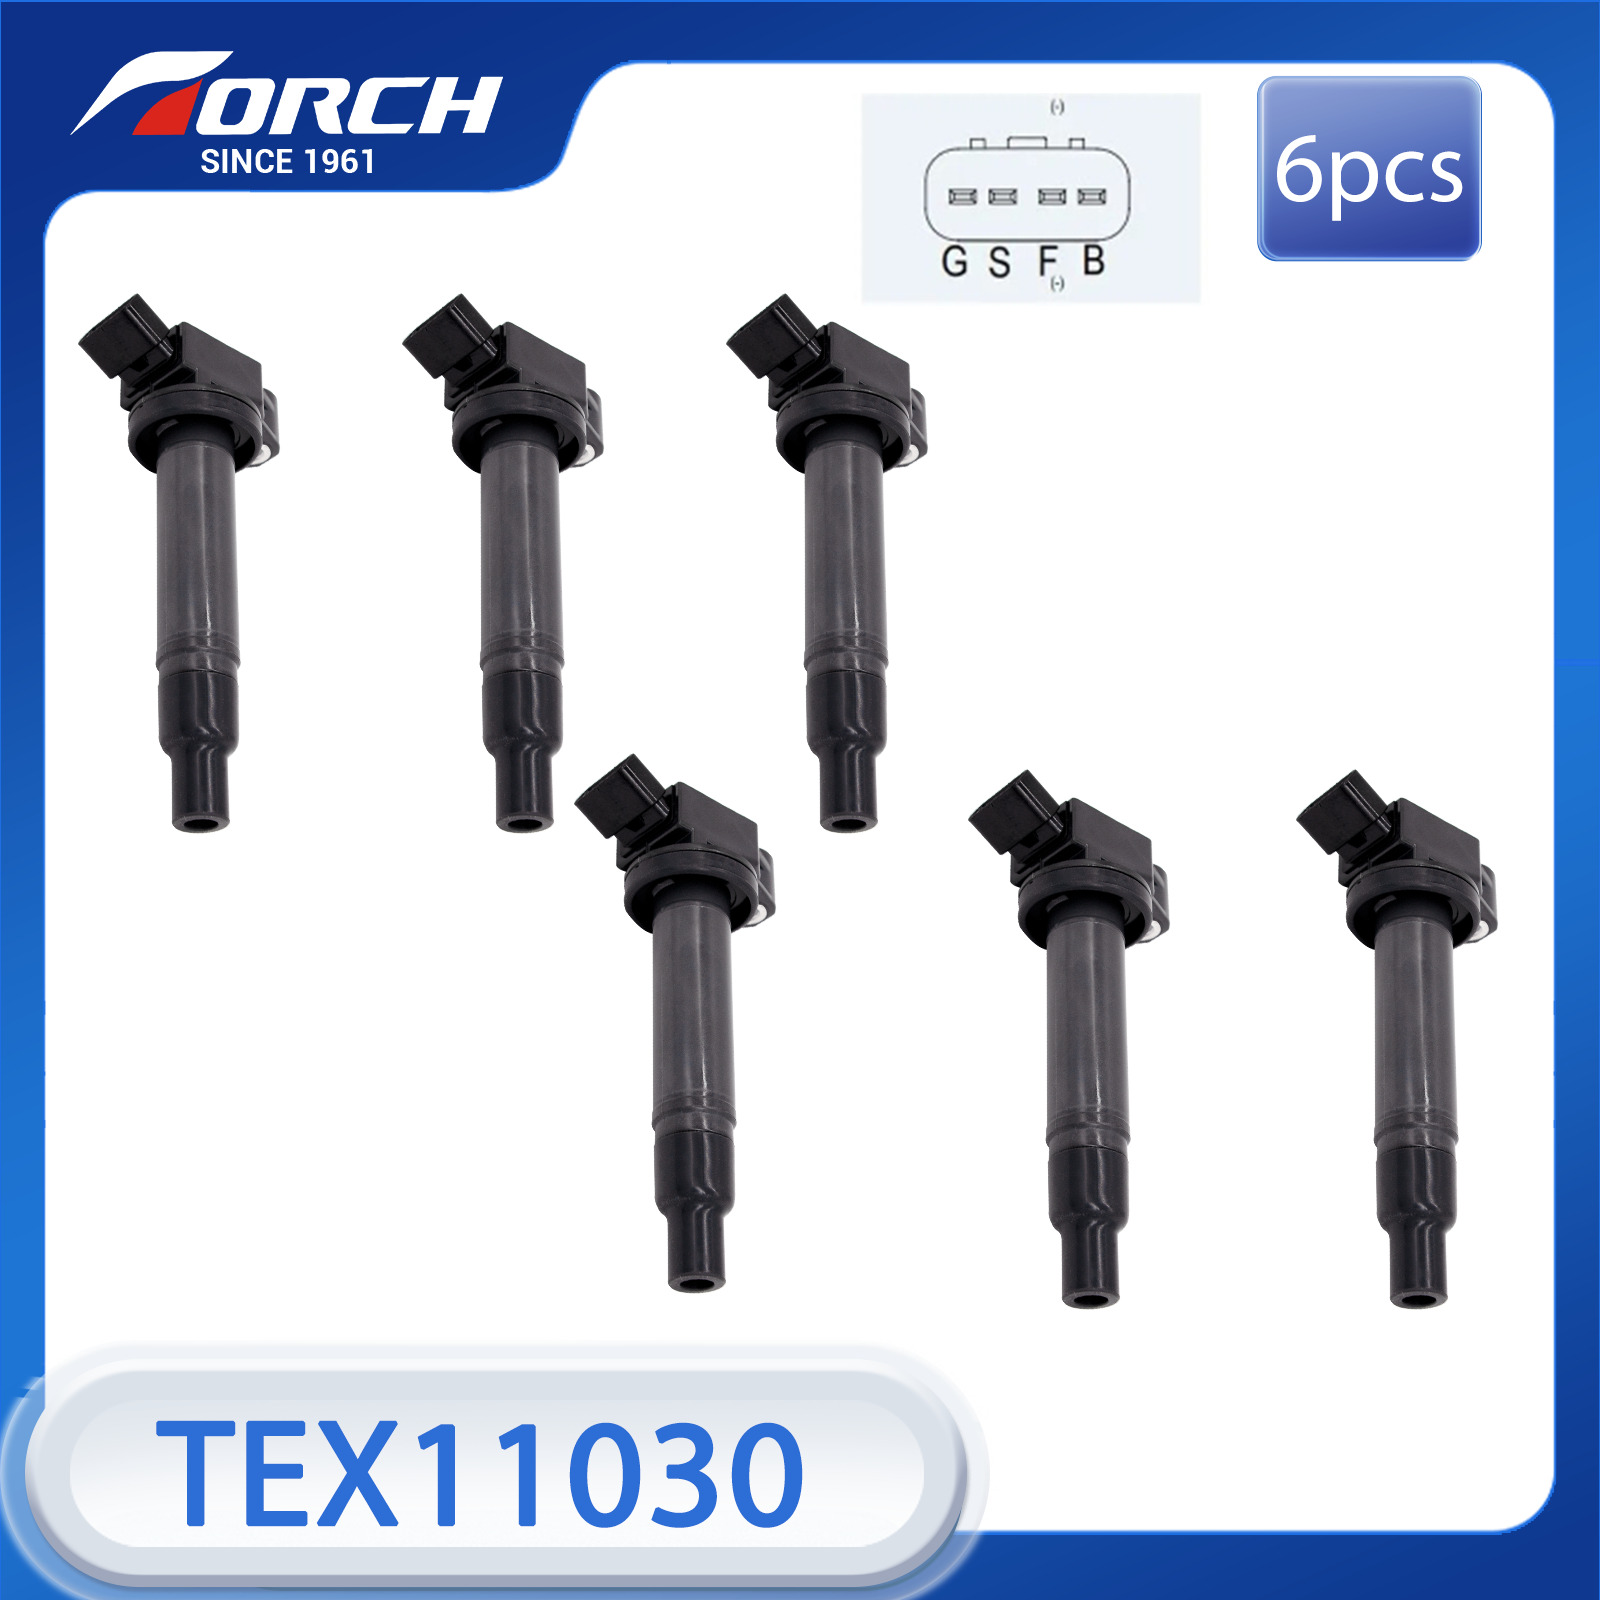 6pcs Ignition Coil TORCH TEX11030 Replace for 88921393 90080-19016 90919-02234